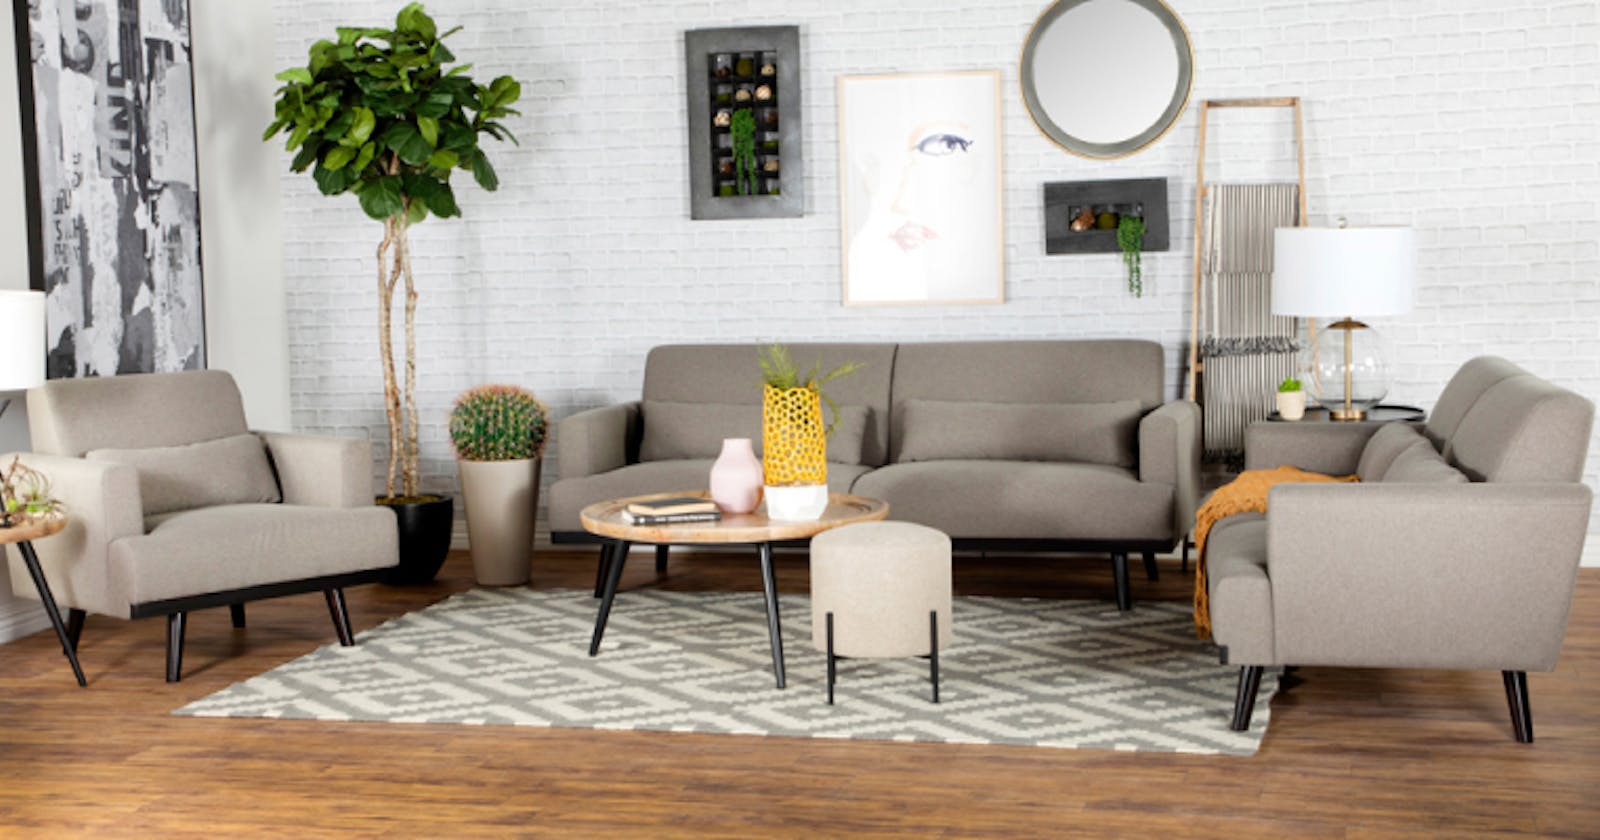 Sofa Sets That Are Perfect for Your Home